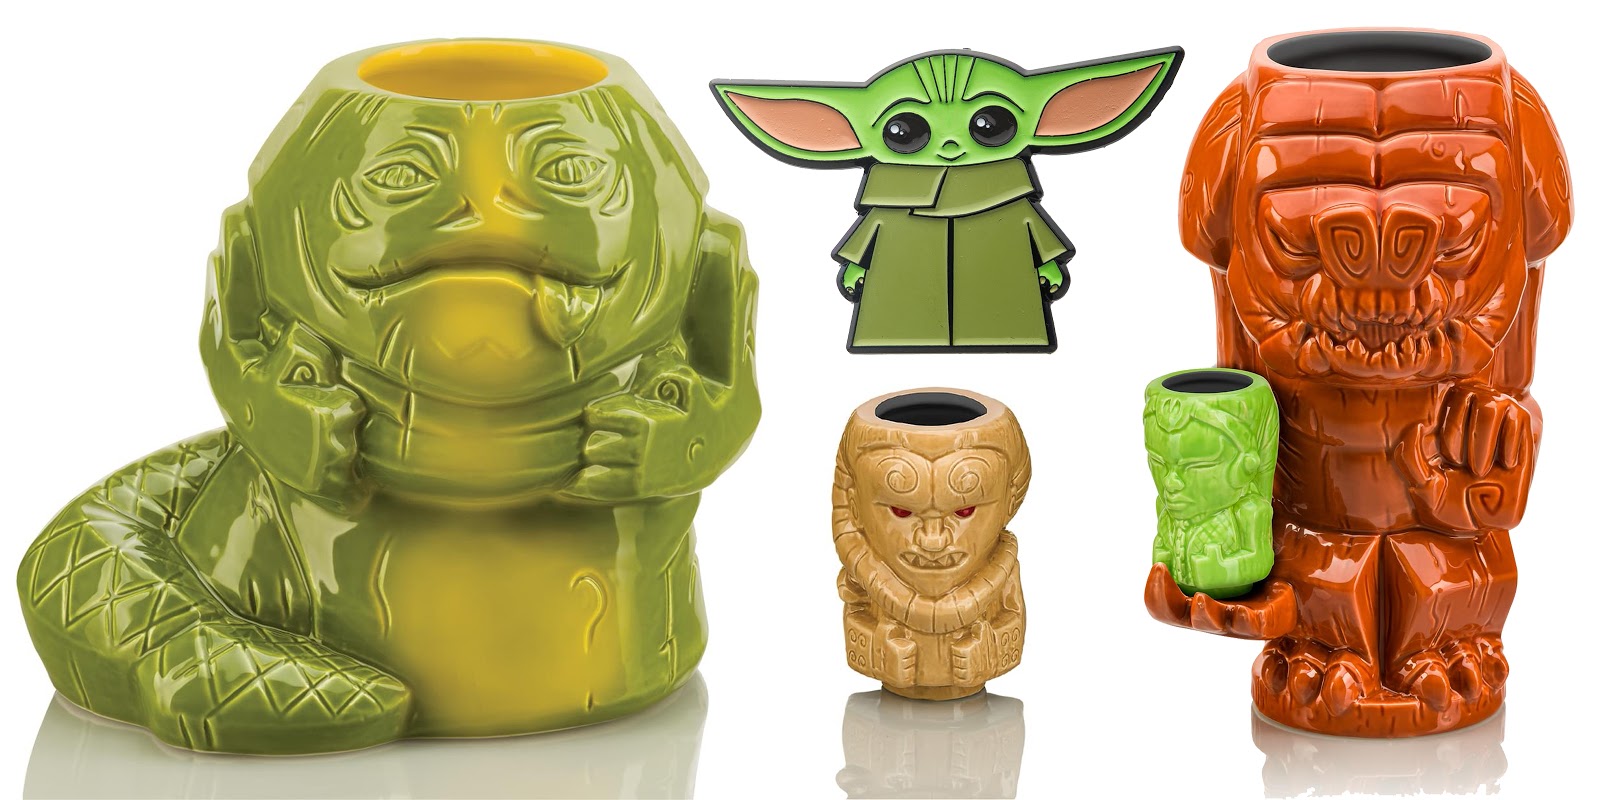 https://www.laughingplace.com/w/wp-content/uploads/2020/04/get-an-exclusive-baby-yoda-pin-when-you-spend-30-on-star-wars-products-at-toynk-on-may-the-4th.jpeg